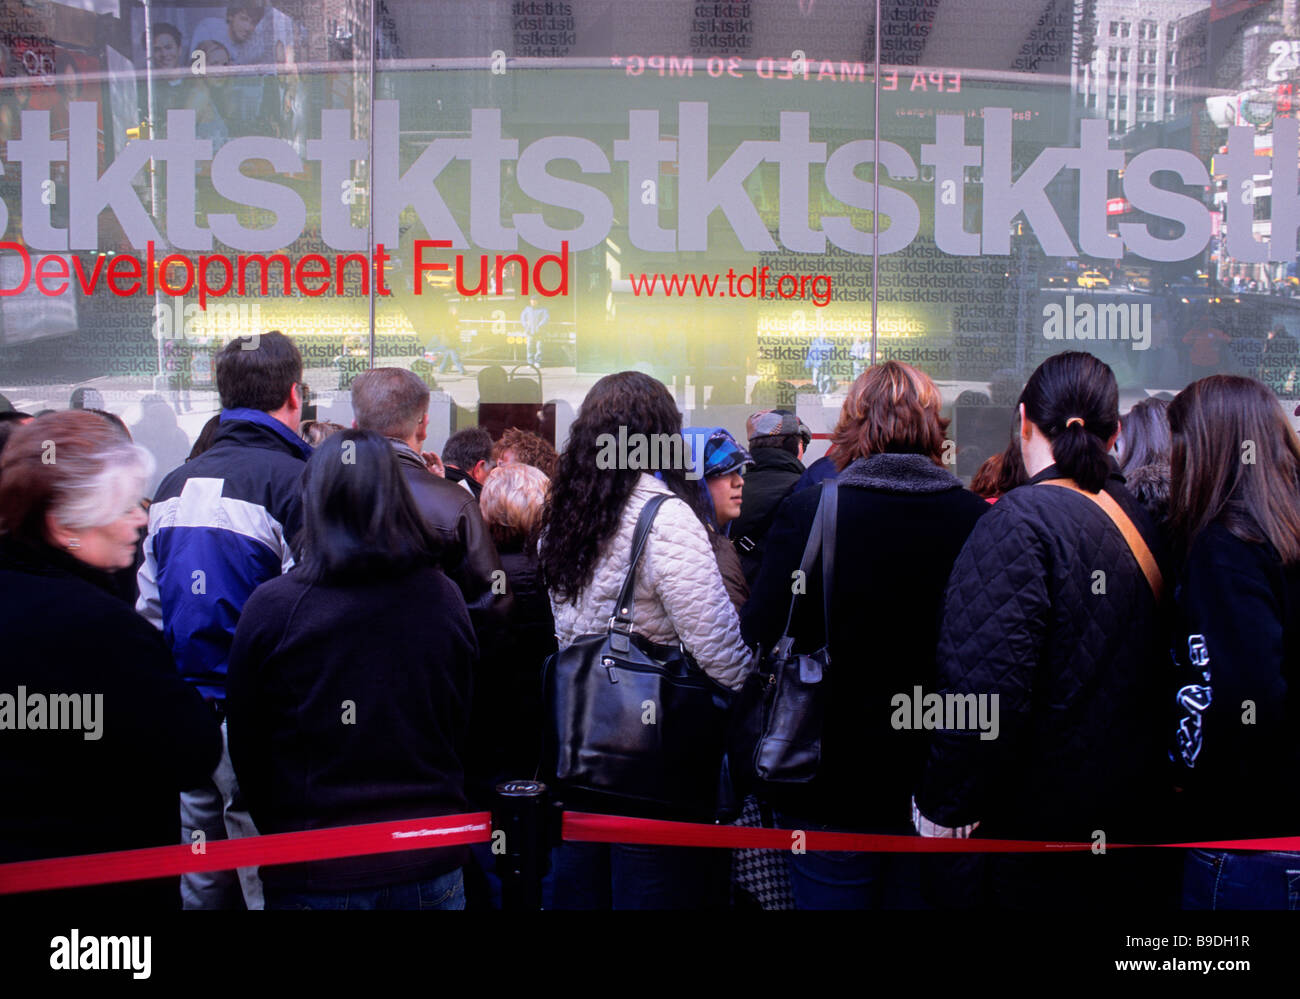 TKTS Ticket booth Times Square Broadway New York .People buying discounted theater tickets for Broadway shows. American culture. New York City USA Stock Photo